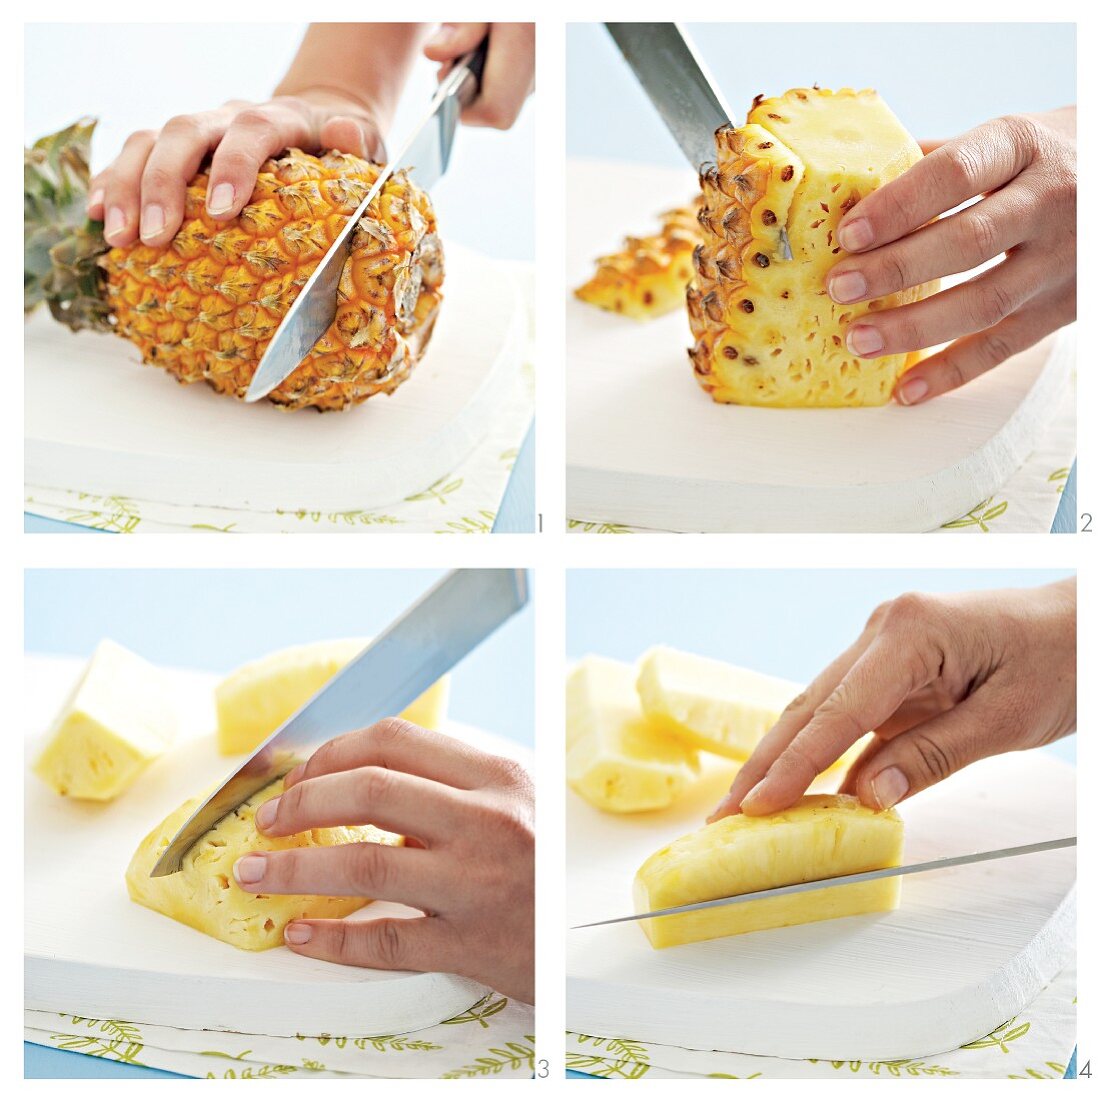 A pineapple being peeled and sliced